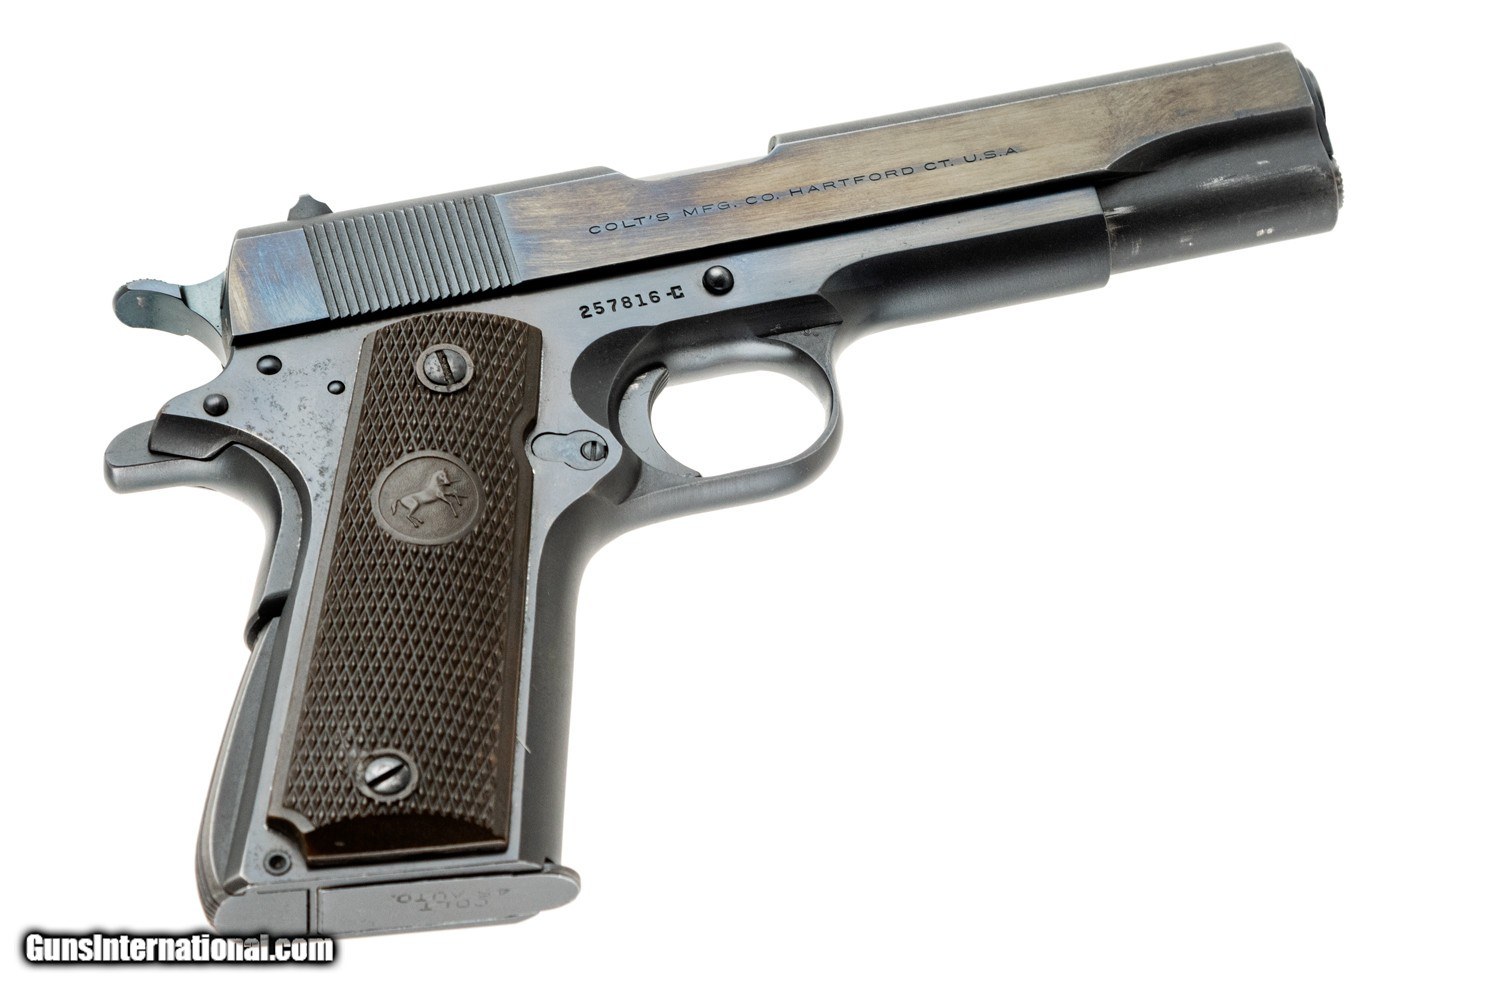 Colt Government Model Commercial 45 Acp 6942